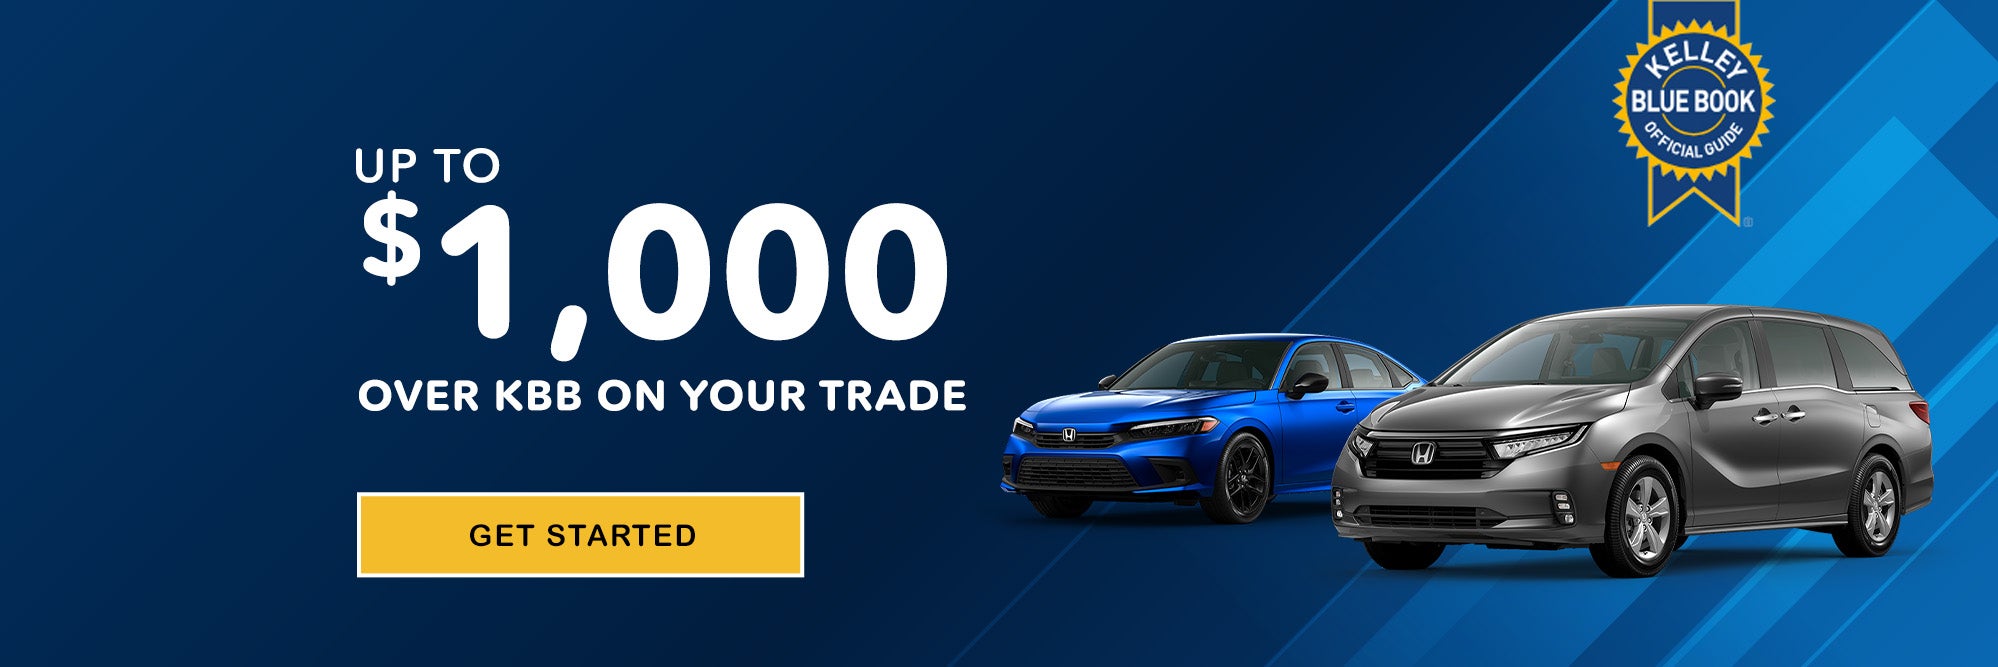 Up to $1,000 over KBB on your trade